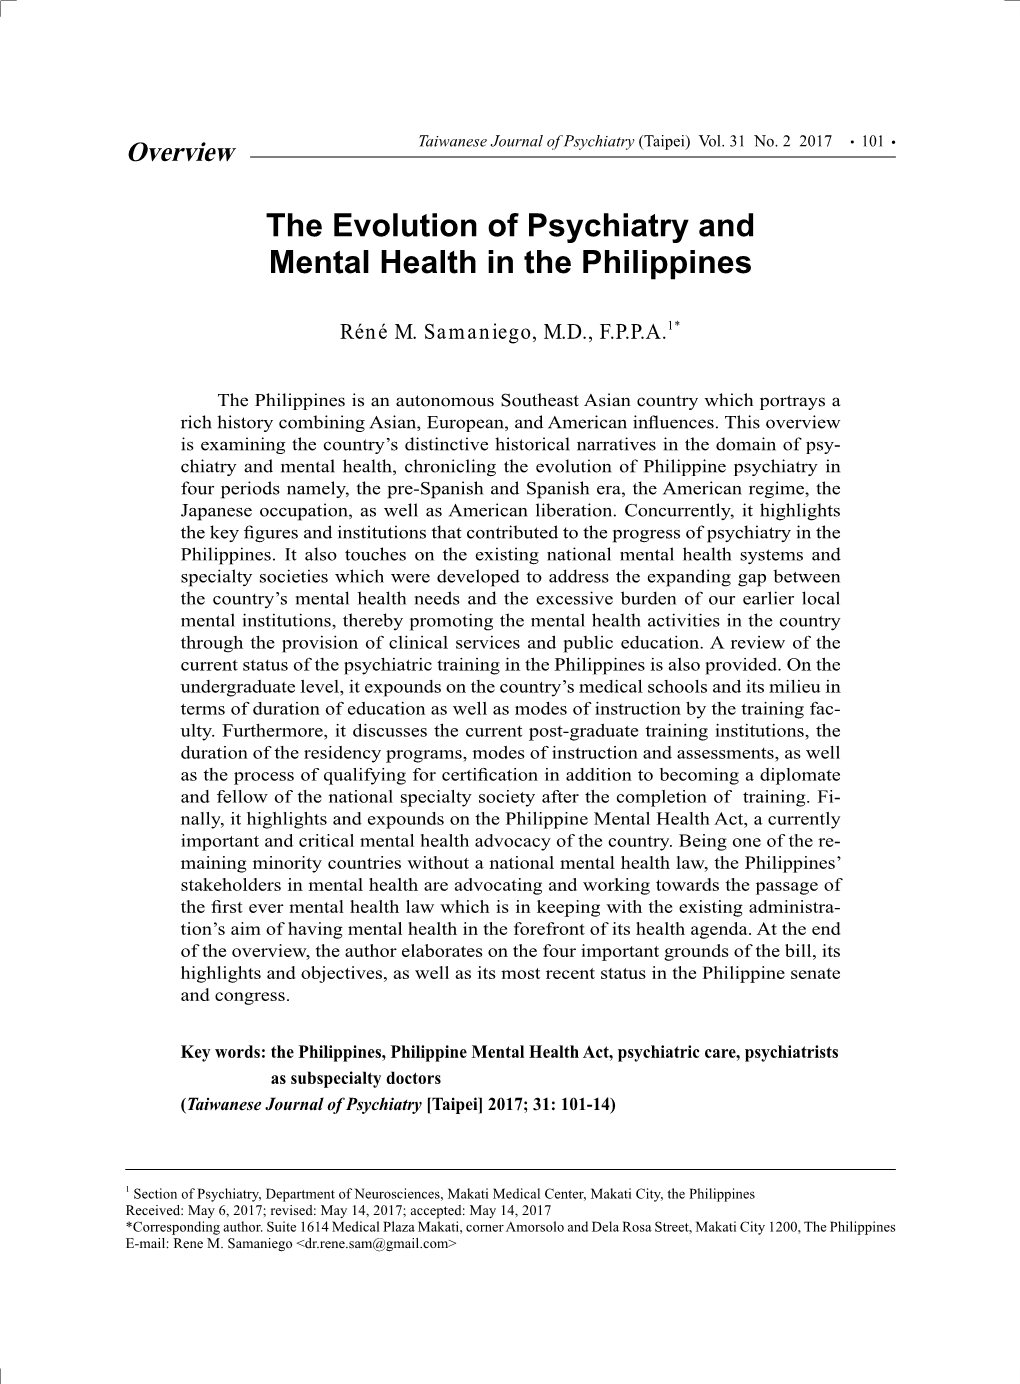 The Evolution of Psychiatry and Mental Health in the Philippines